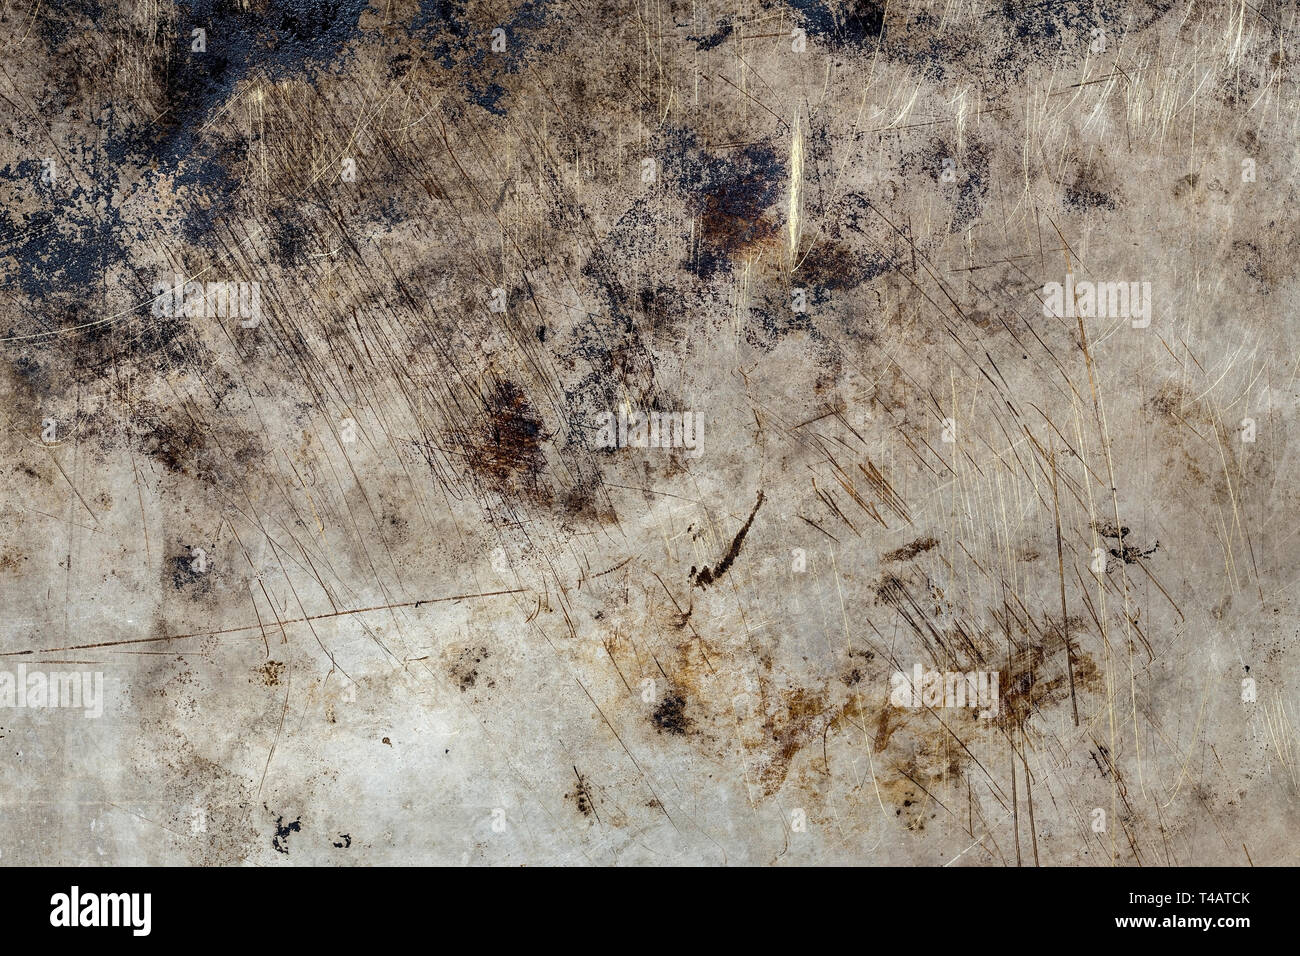 Grunge metal stained background Stock Photo